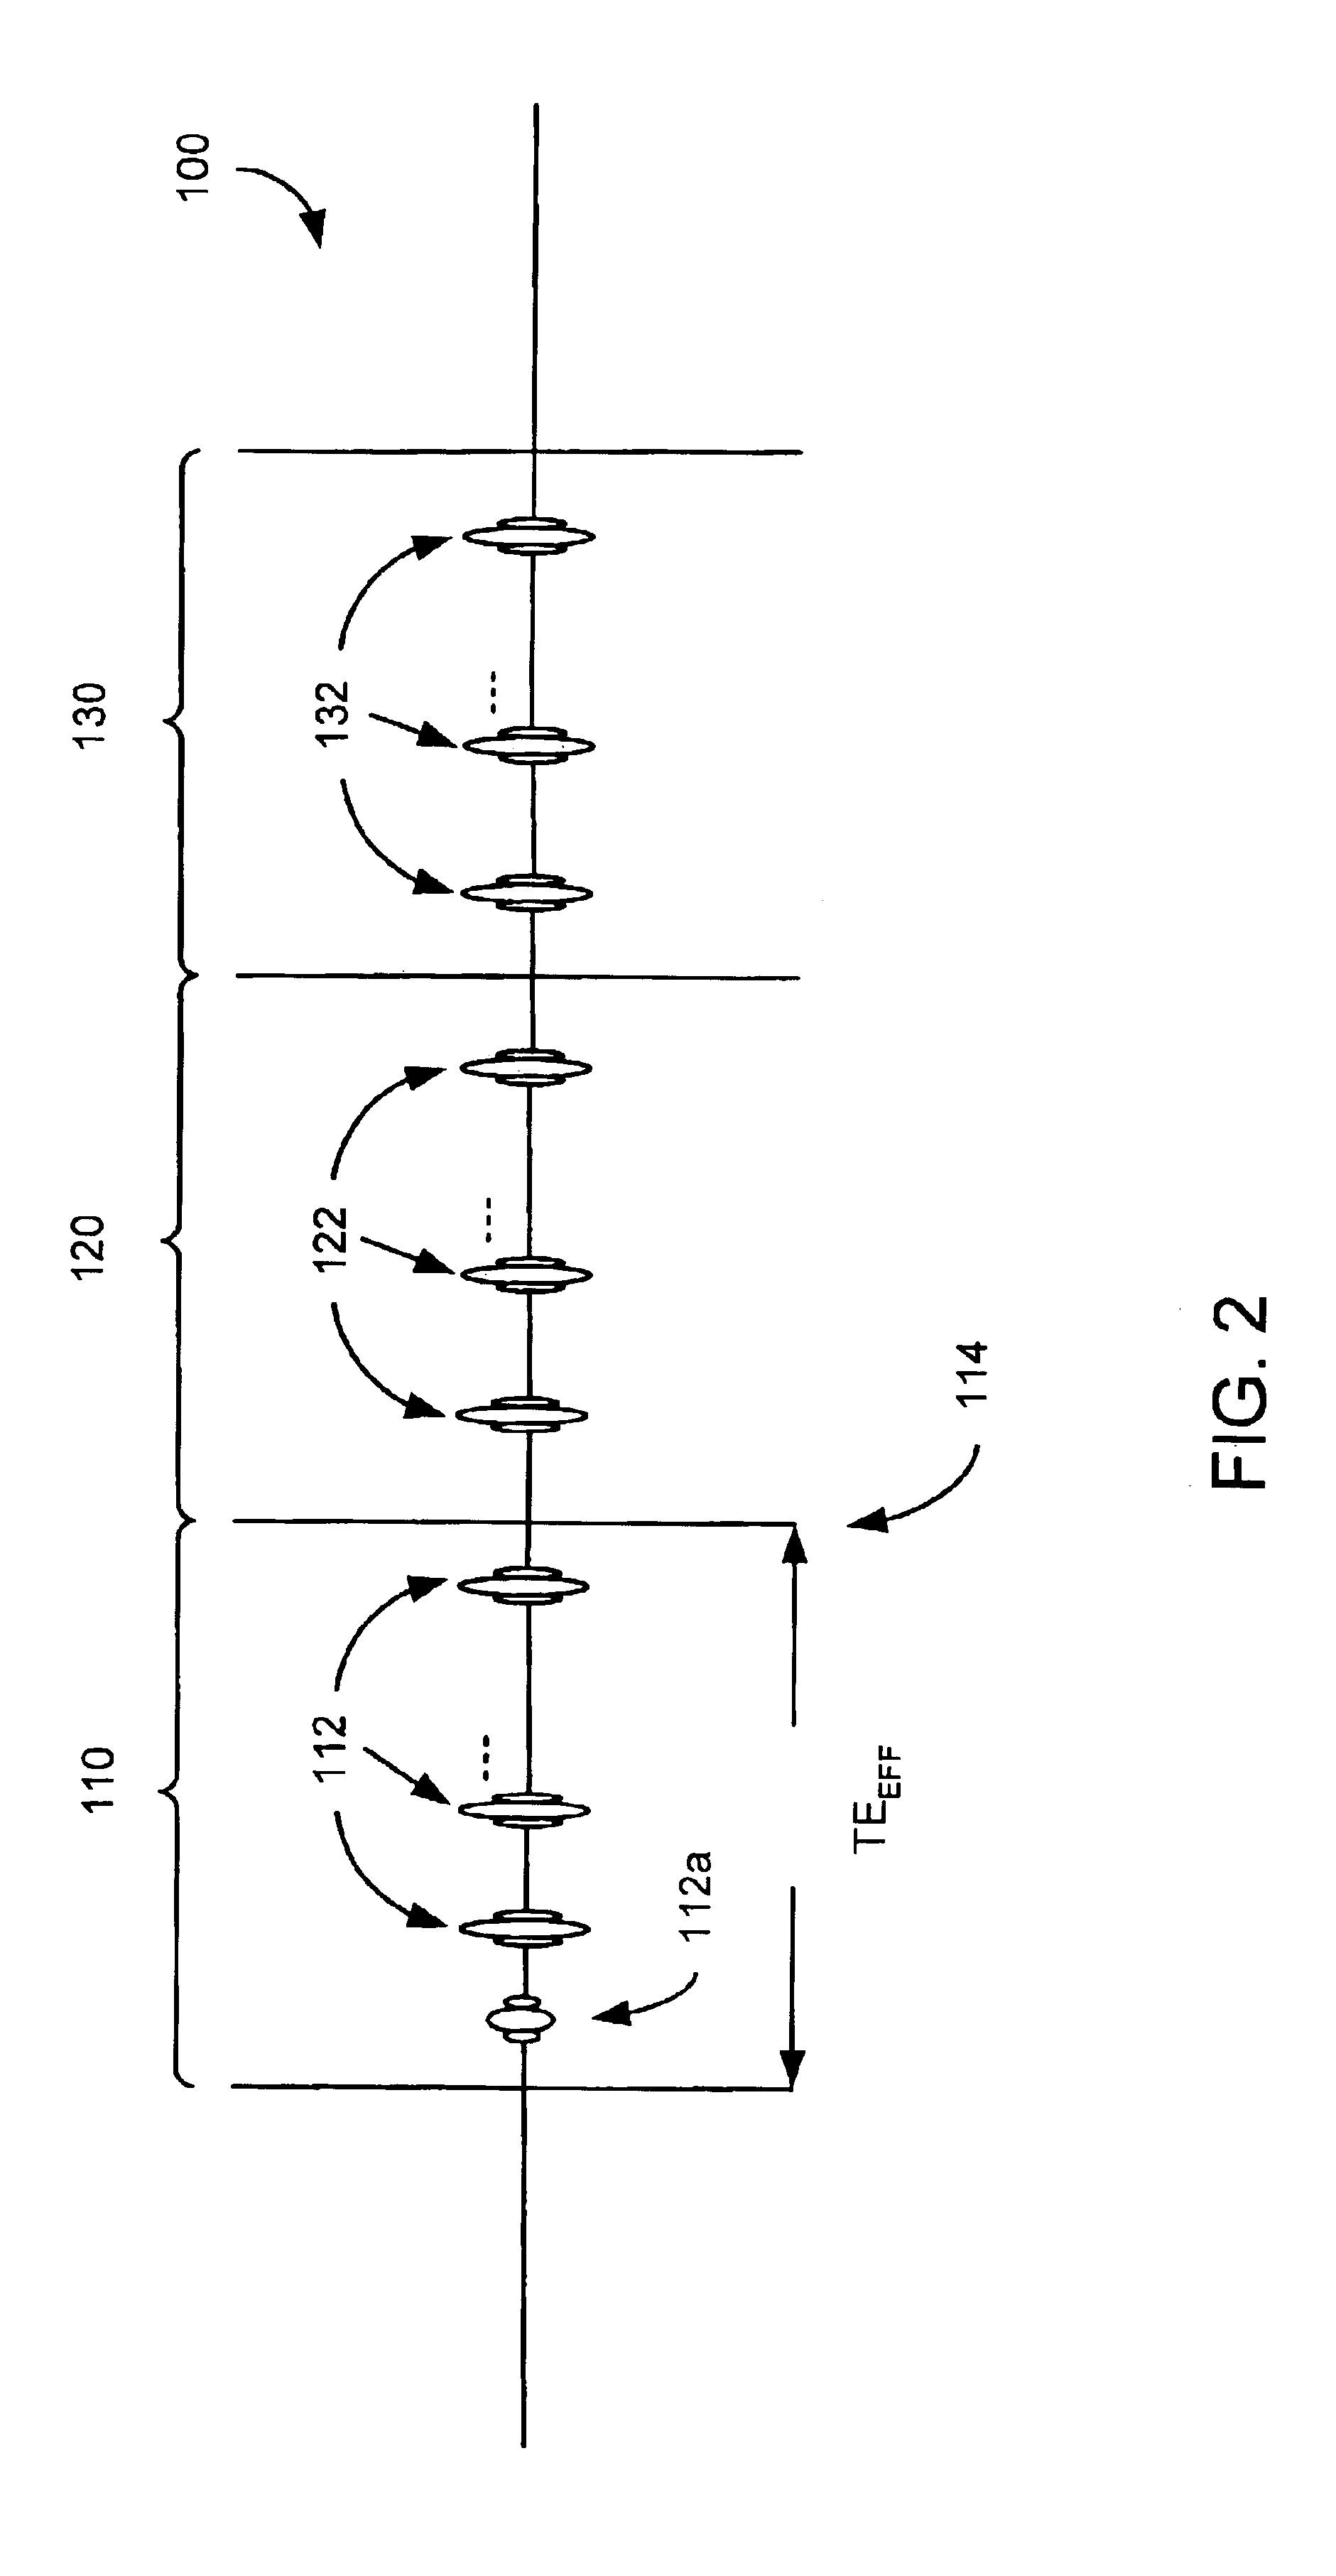 Method and apparatus to reduce RF power in high field MR imaging incorporating multi-phase RF pulse flip angles